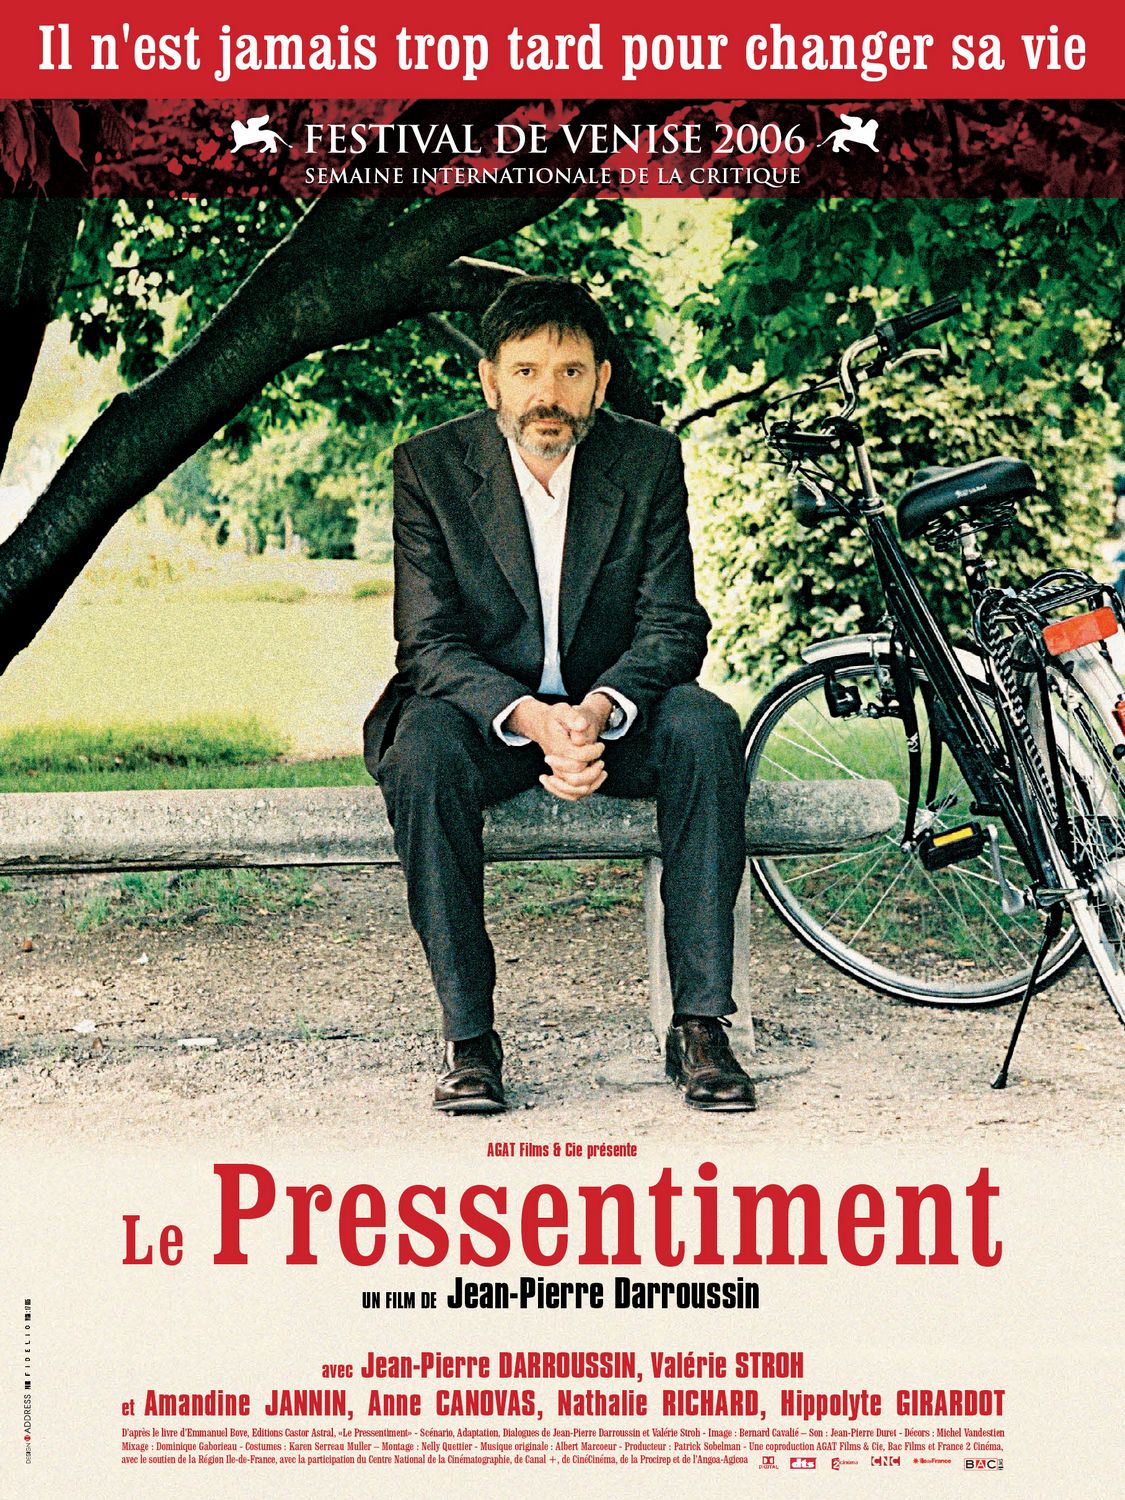 Extra Large Movie Poster Image for Pressentiment, Le 